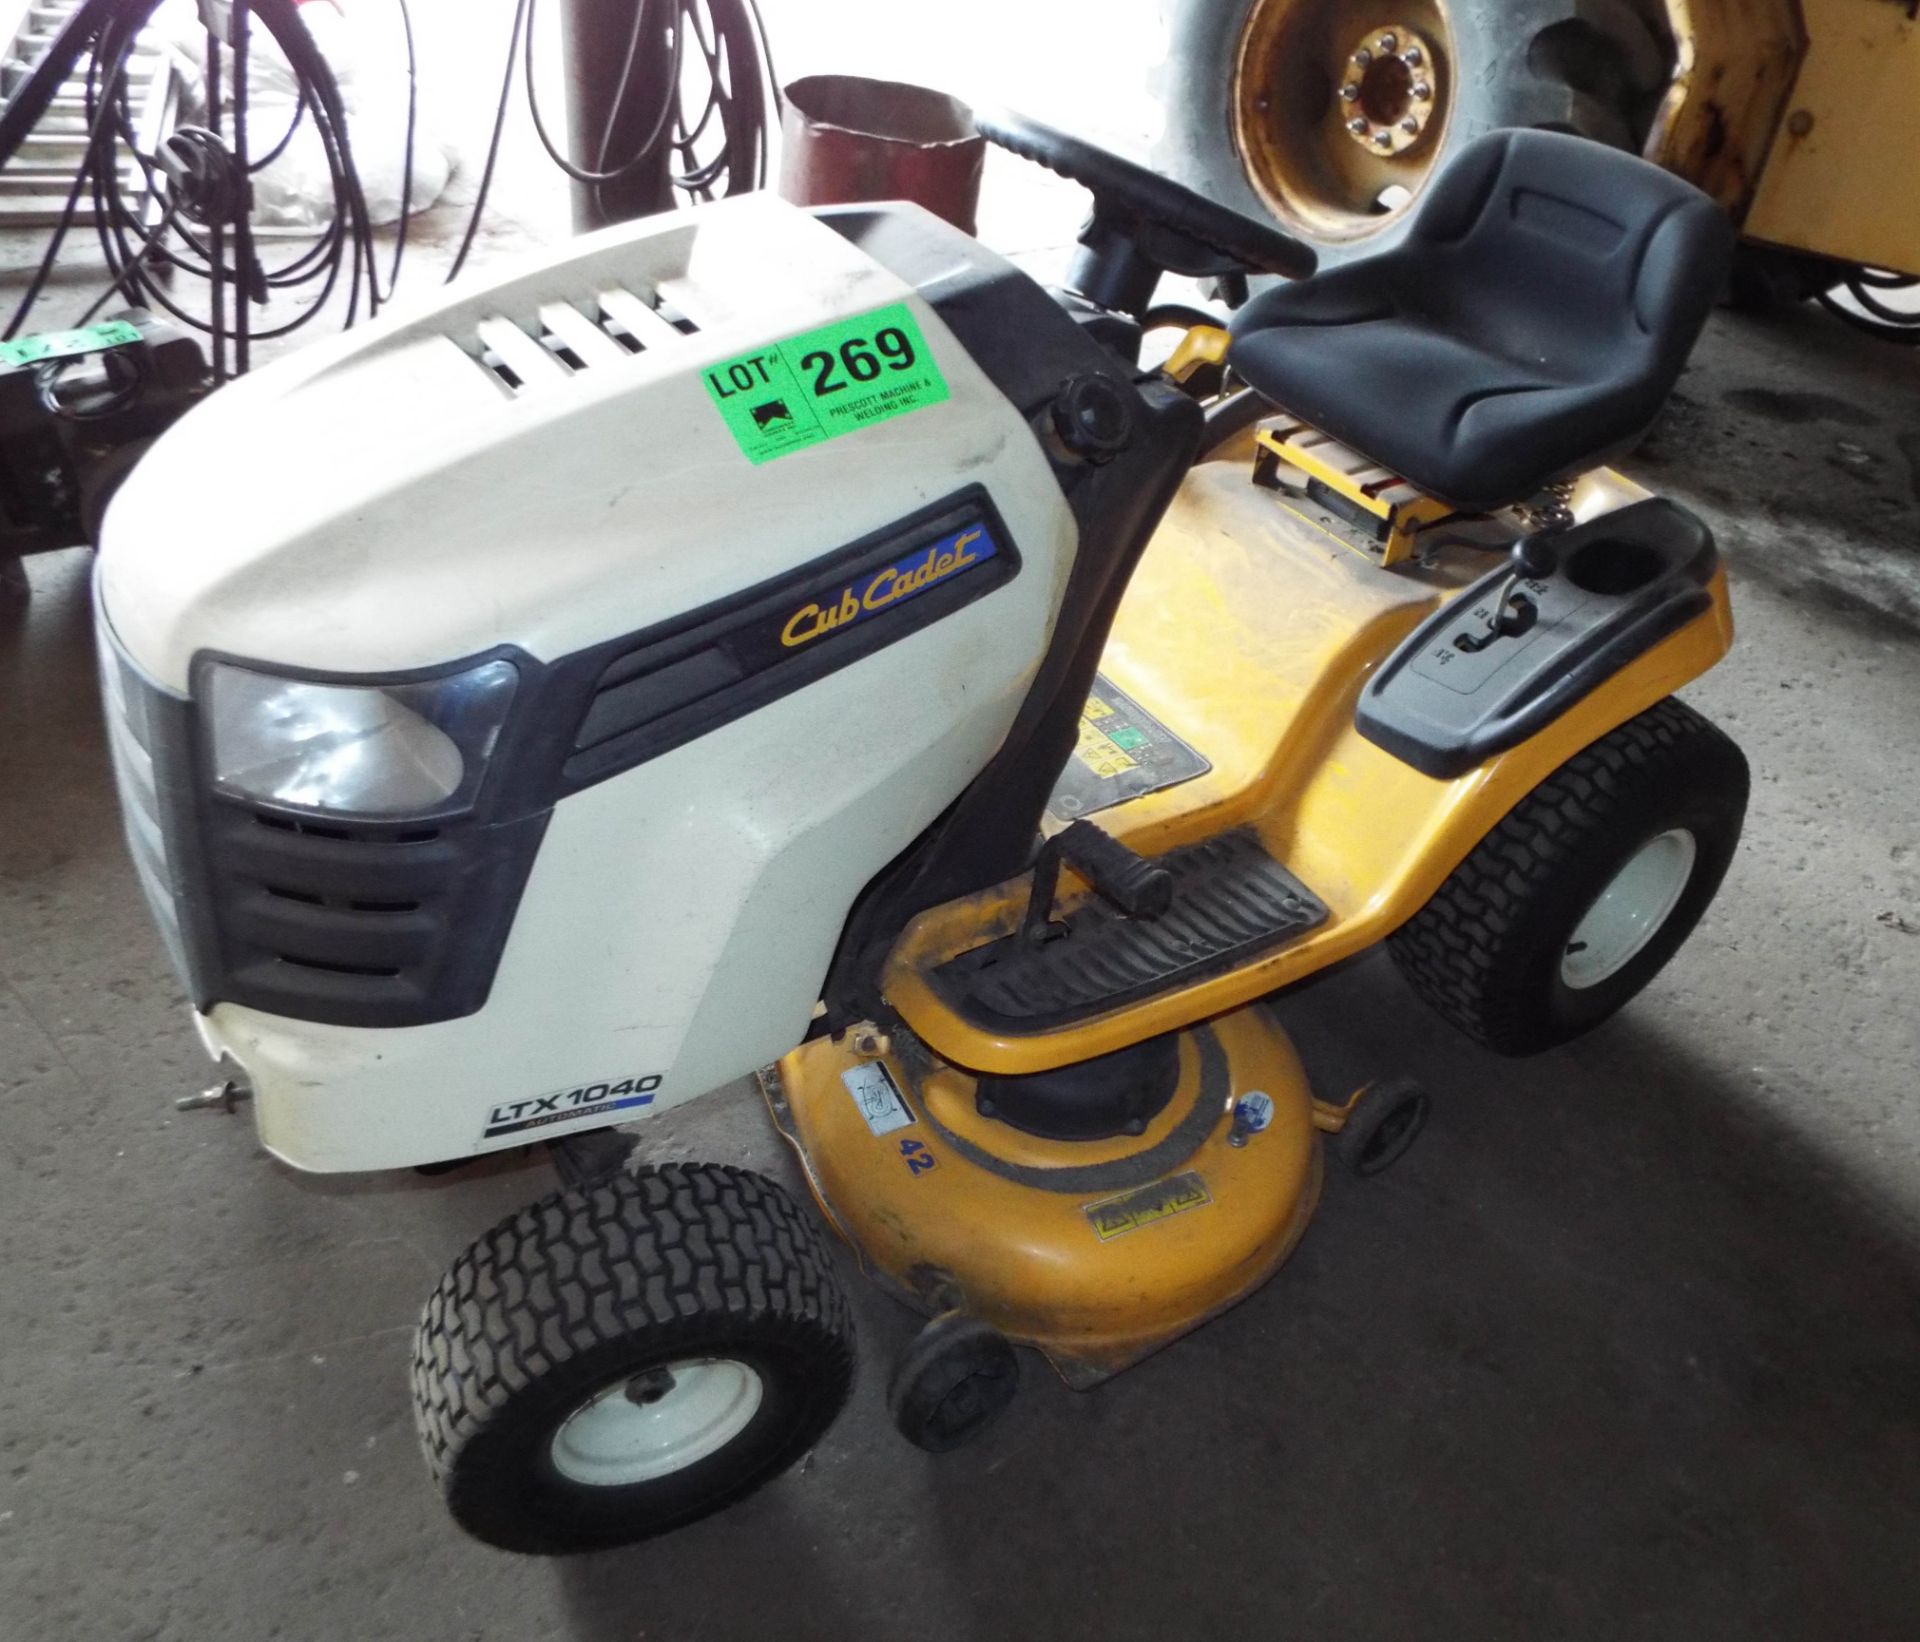 CUB CADET LTX1040 AUTOMATIC LAWN TRACTOR WITH 42" BLADE DECK, KOHLER COURAGE 19 TWIN CAM OHV 597CC - Image 2 of 2